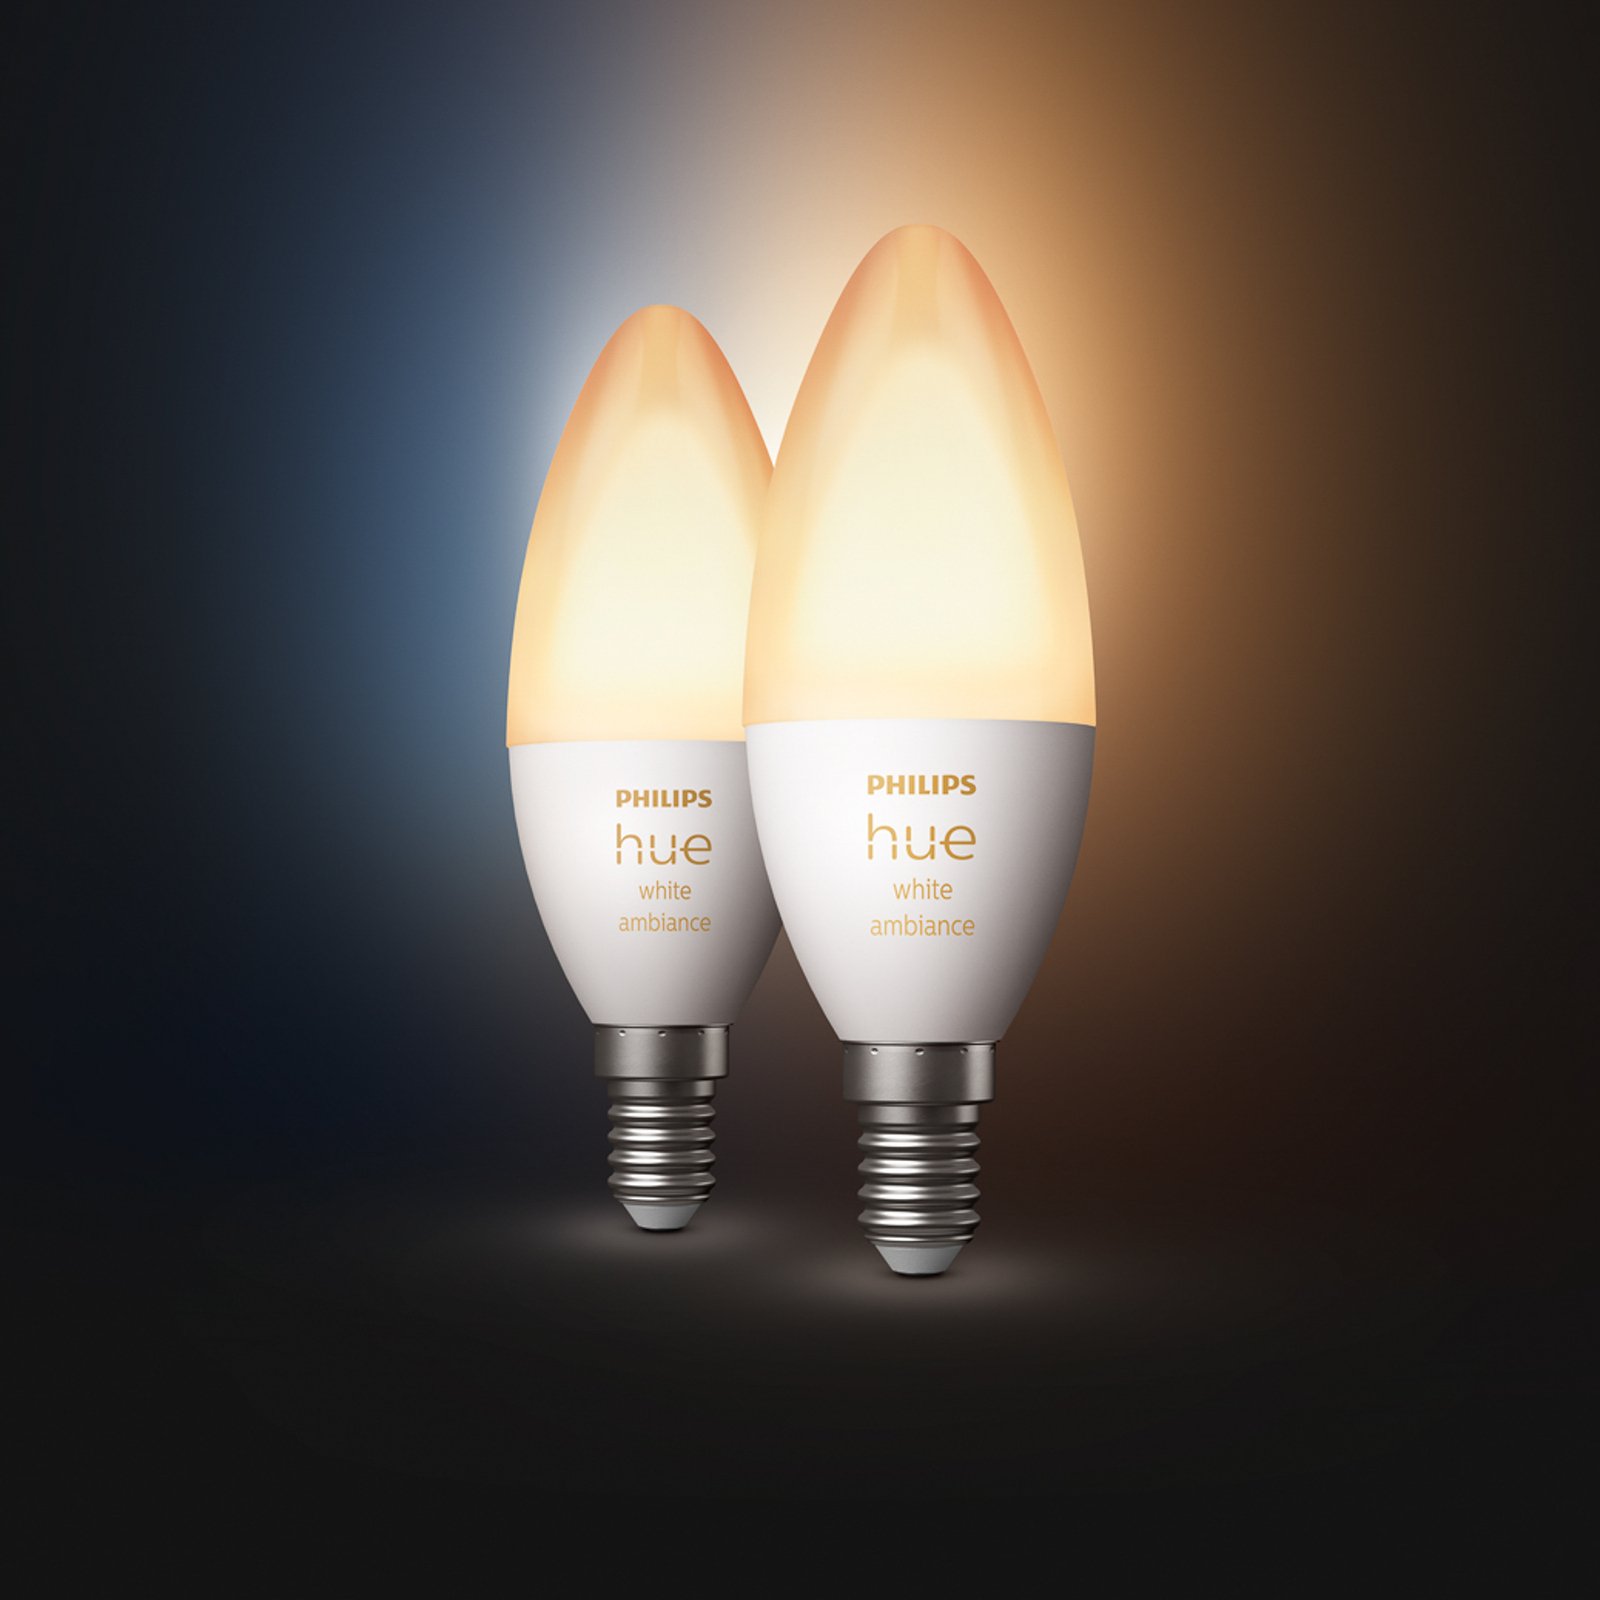 Soms capaciteit mild Philips Hue kaarslamp White Ambiance 2x E14 5,2W | Lampen24.be